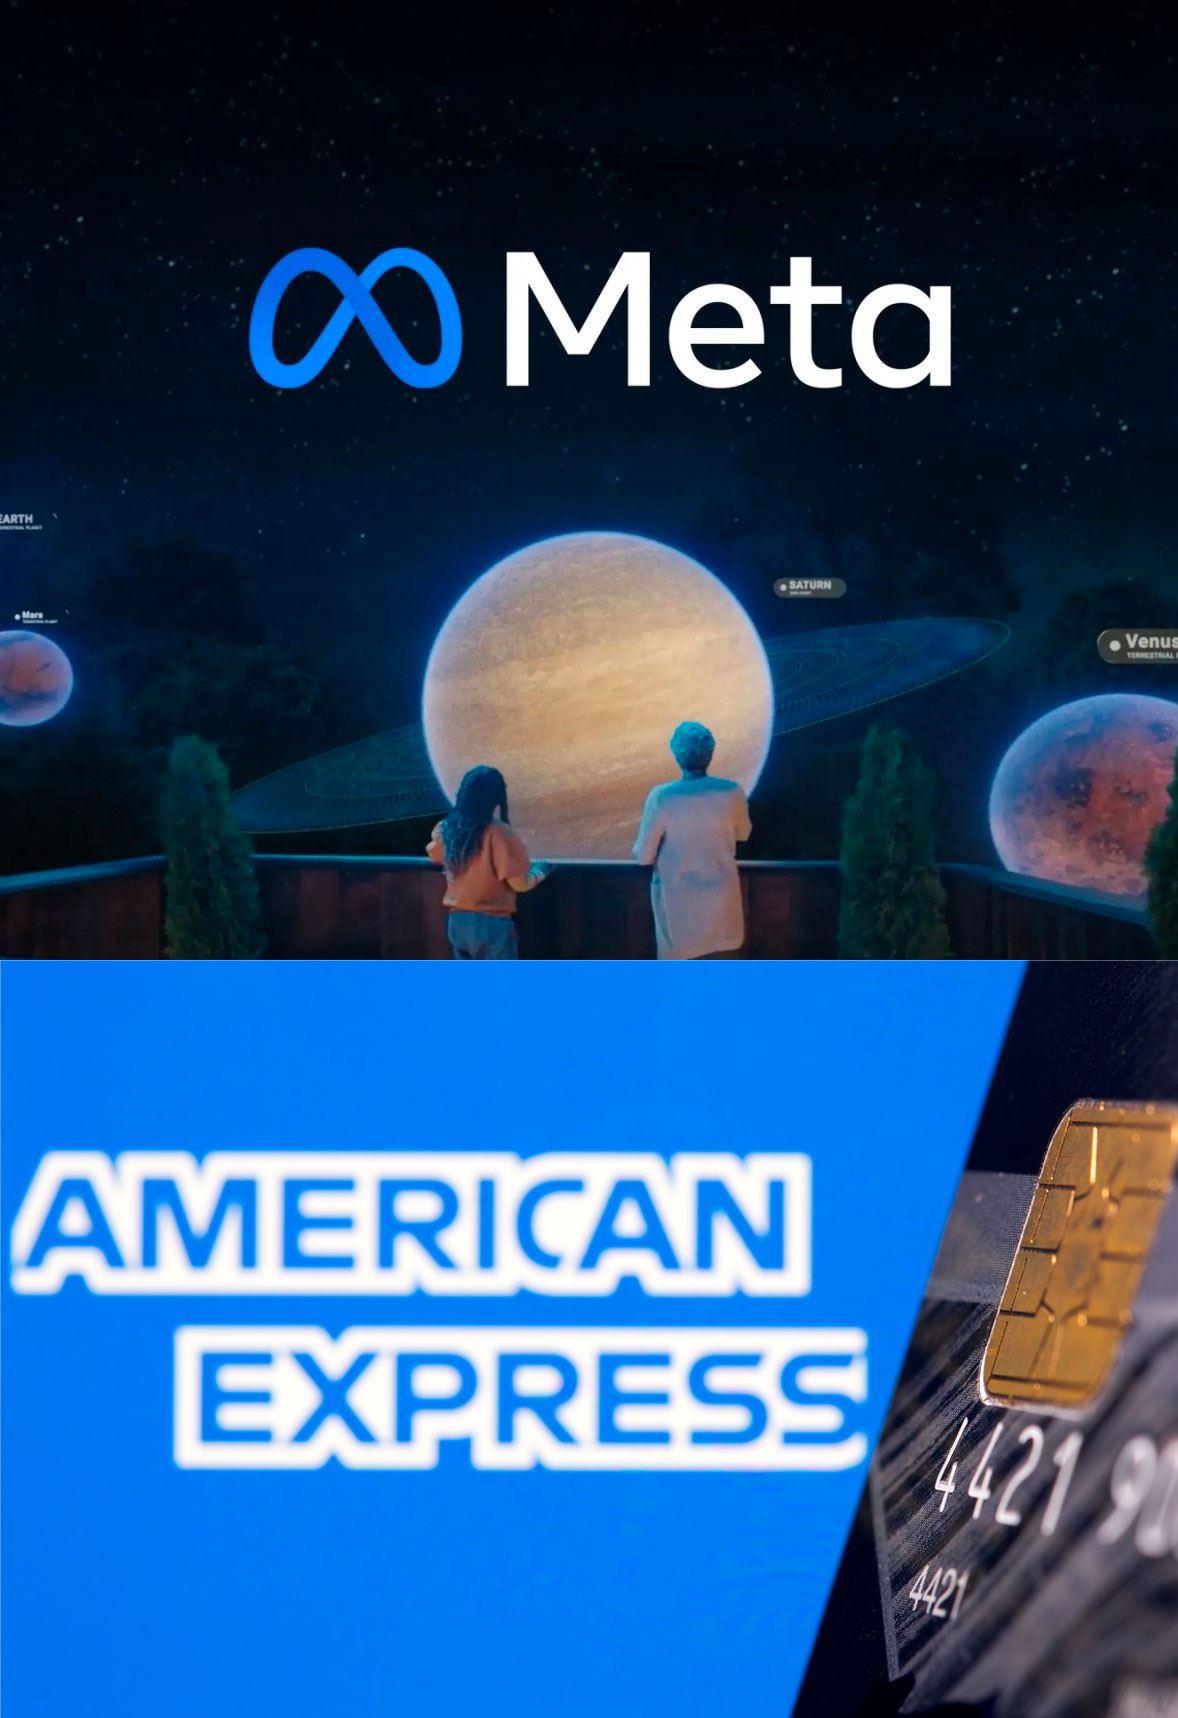 Explain the reasons of buying US stock Meta Platforms (FB) and selling American Express (AXP) and share my views.